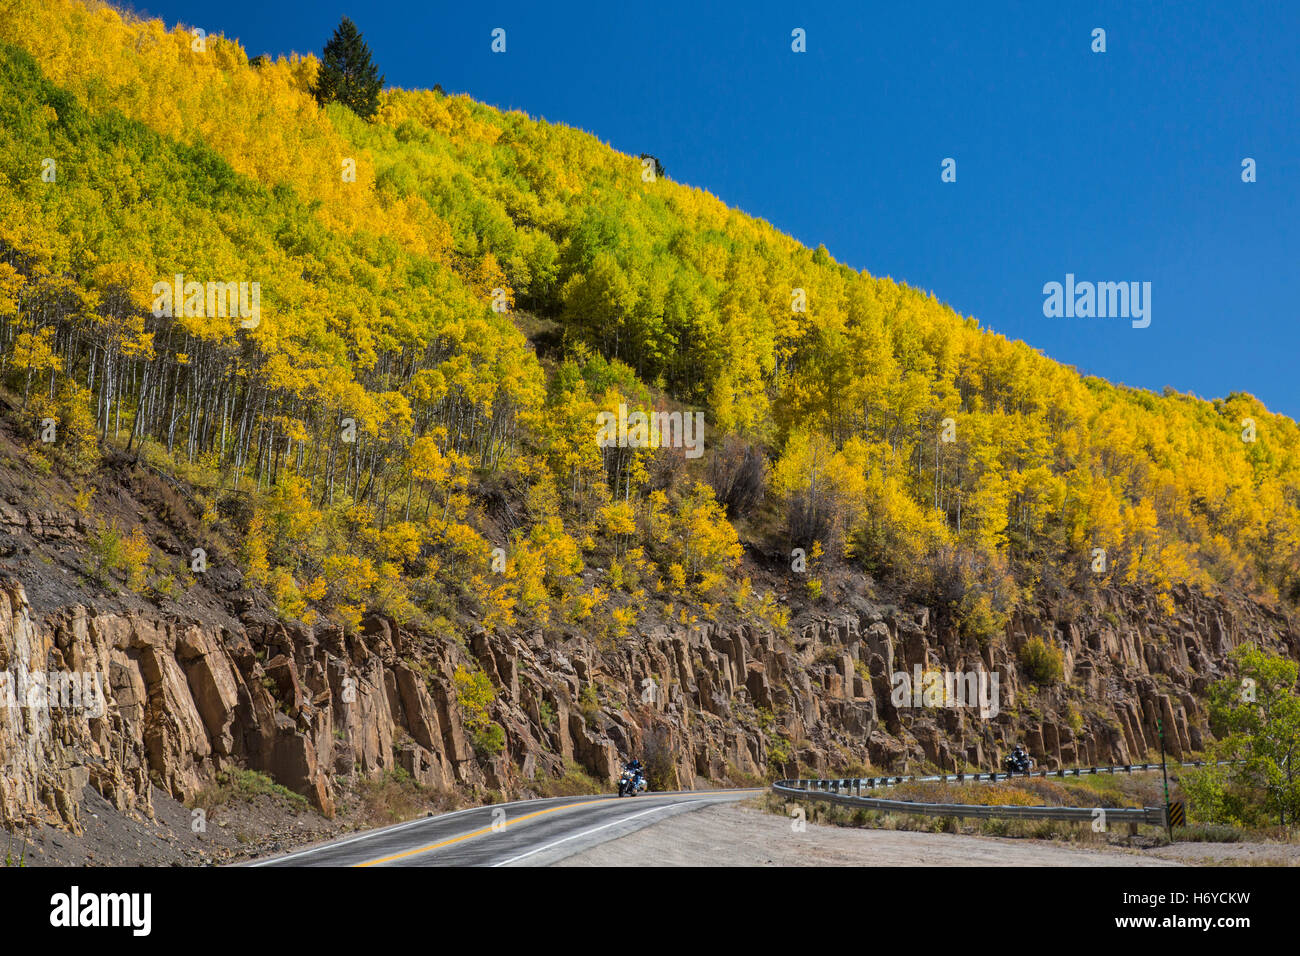 Leadville, Colorado - Motorcycles on US Highway 24 during autumn in the Rocky Mountains. Stock Photo